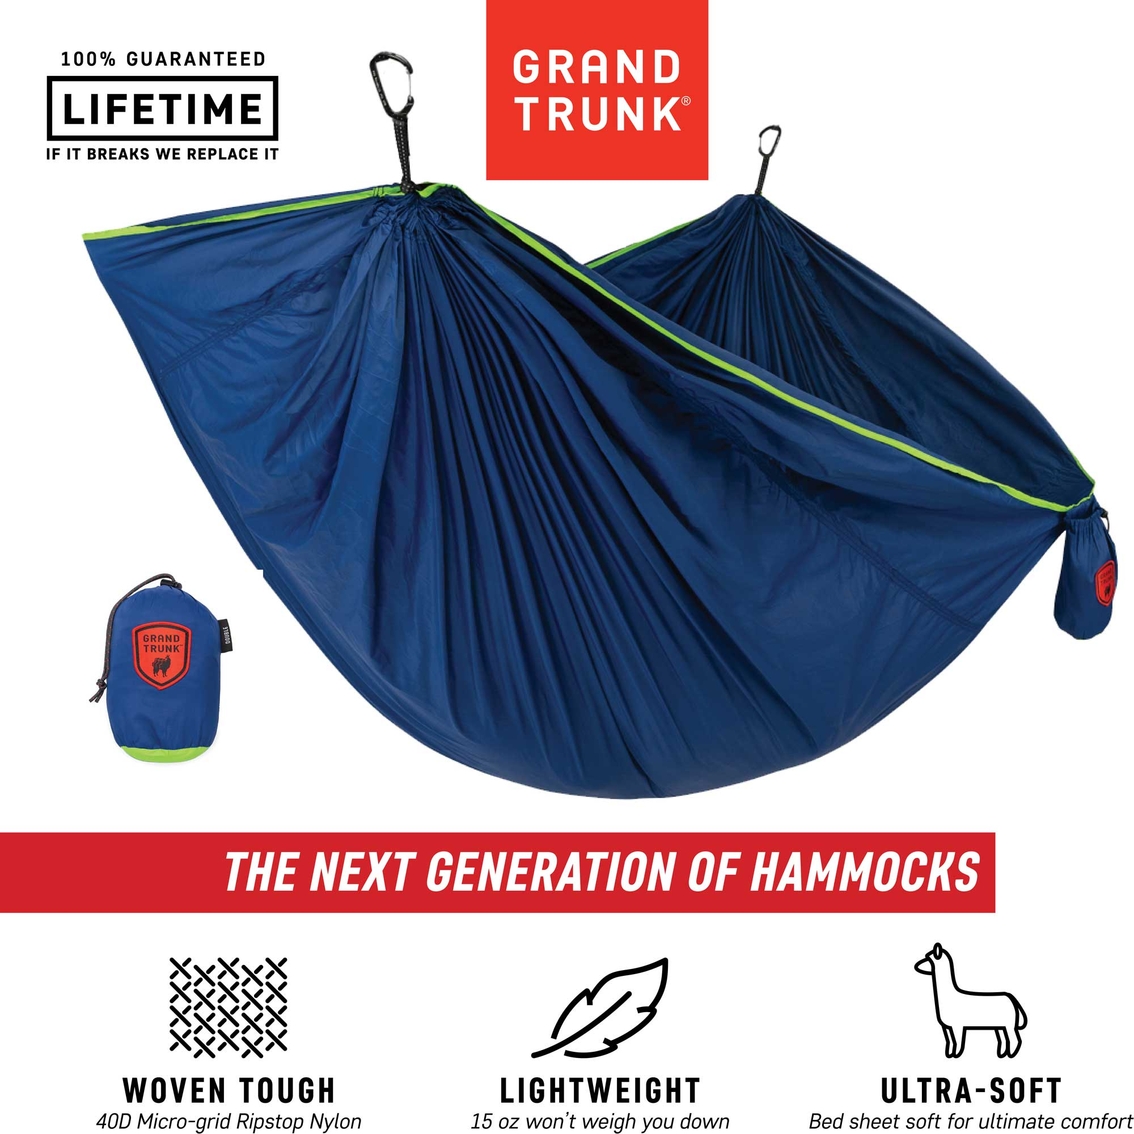 Grand Trunk TrunkTech Double Hammock - Image 2 of 7